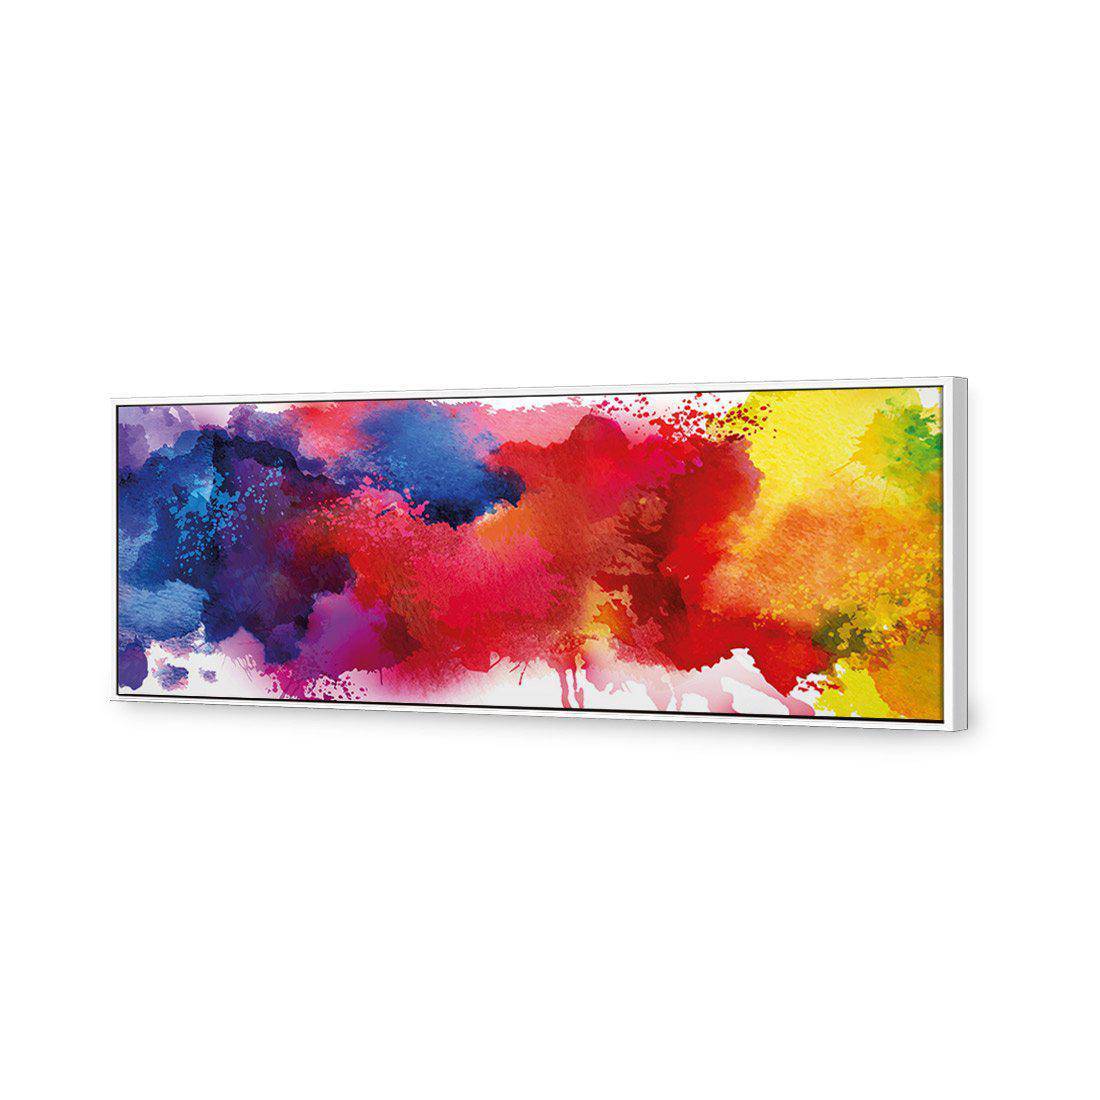 Primary Stains Canvas Art-Canvas-Wall Art Designs-60x20cm-Canvas - White Frame-Wall Art Designs